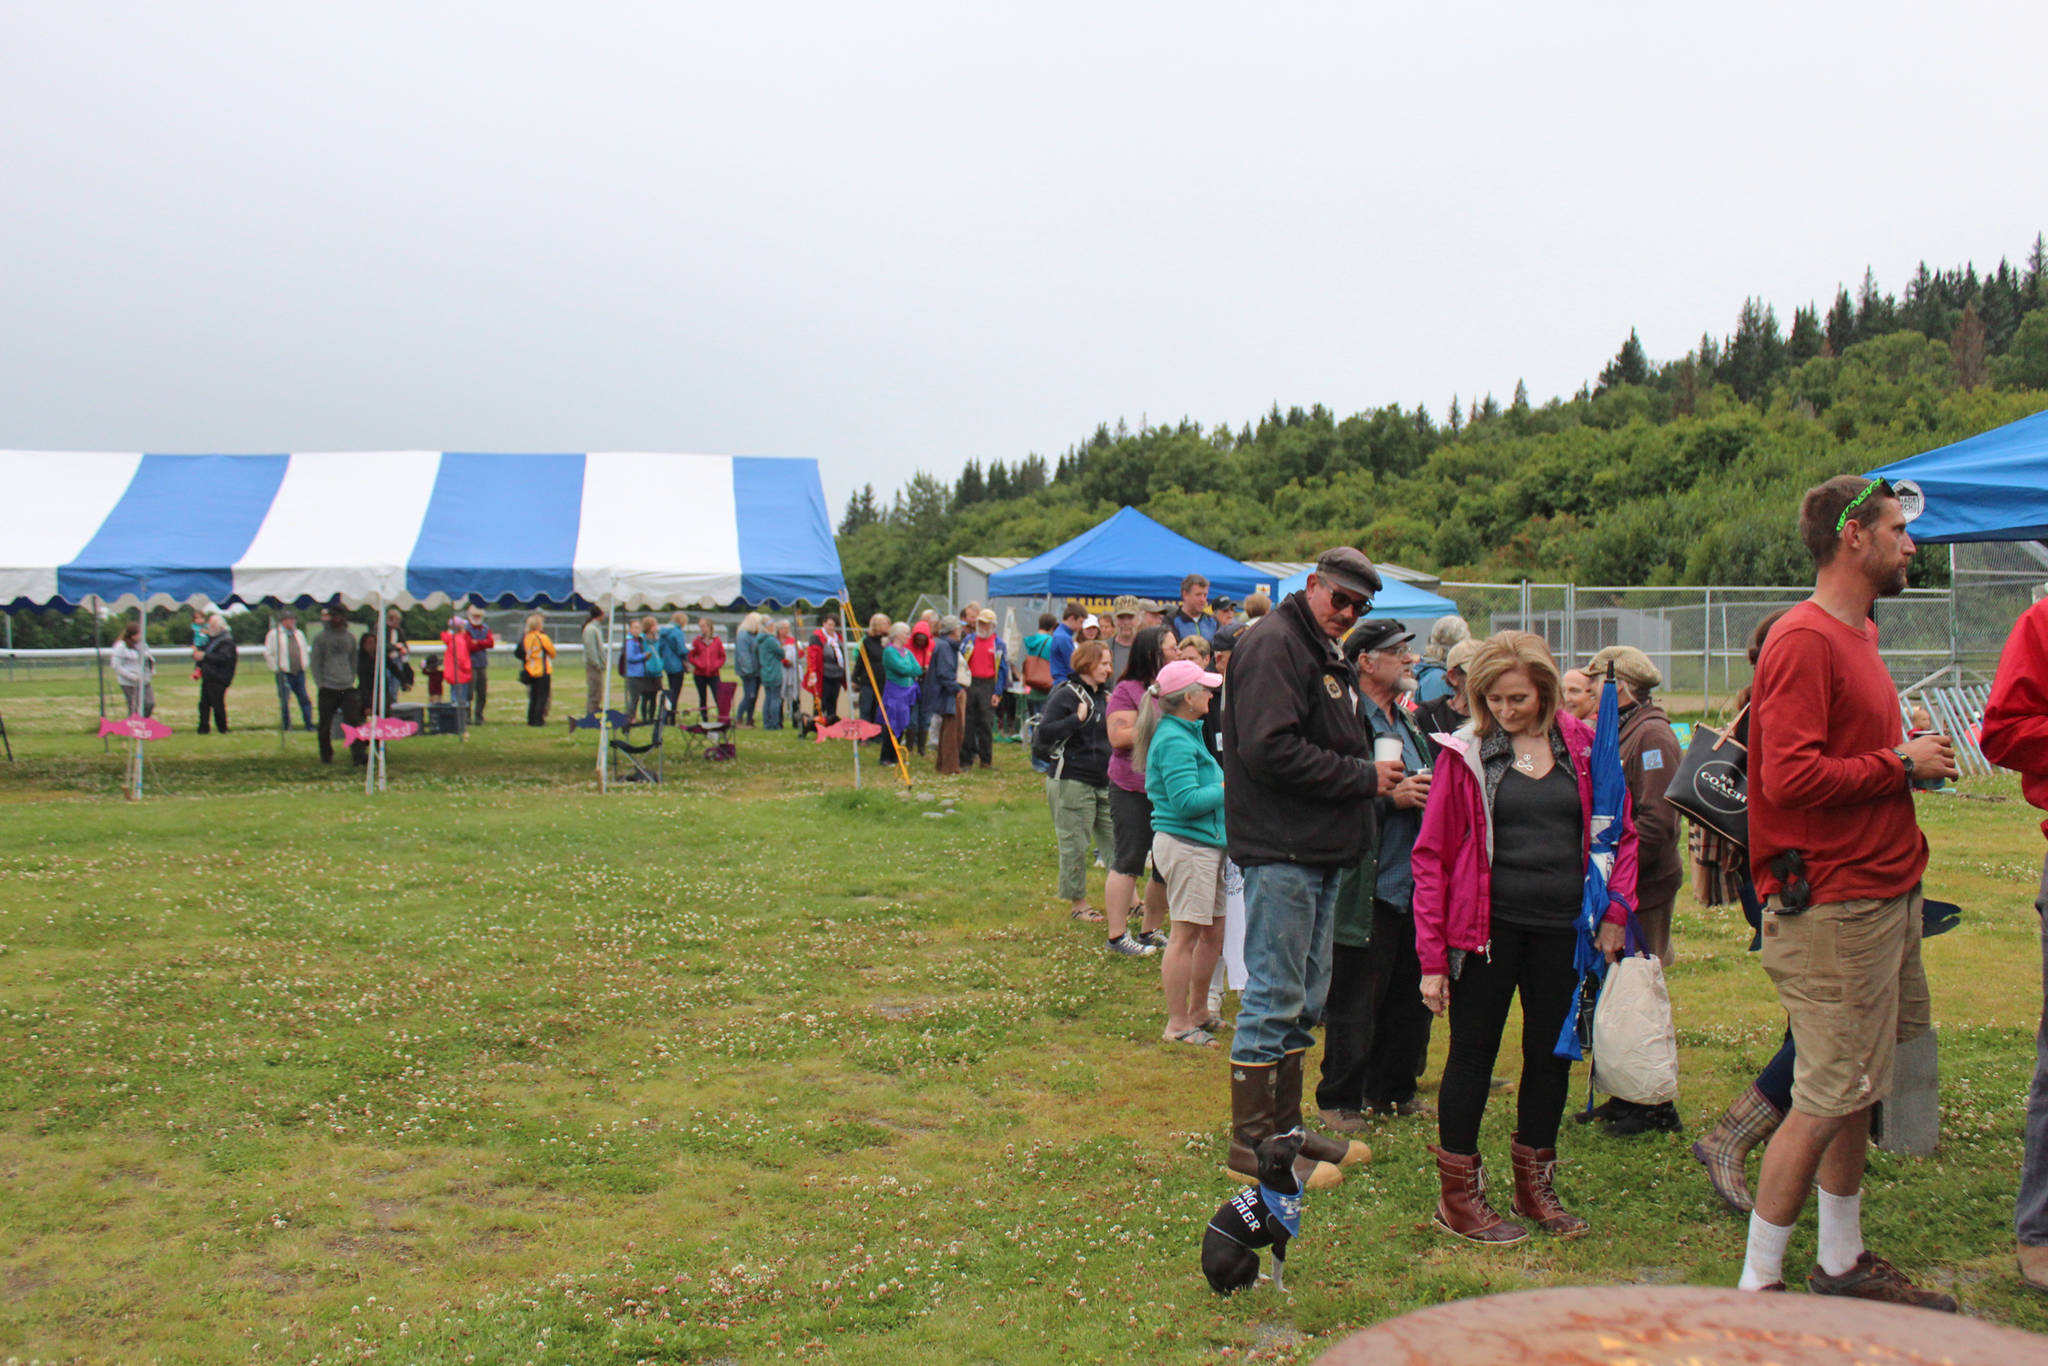 Area residents wait in a line that snakes around Karen Hornaday Park for some grilled salmon during a barbecue for Wild Alaska Salmon Day, held Friday, Aug. 10, 2018 at the park in Homer, Alaska. (Photo by Megan Pacer/Homer News)